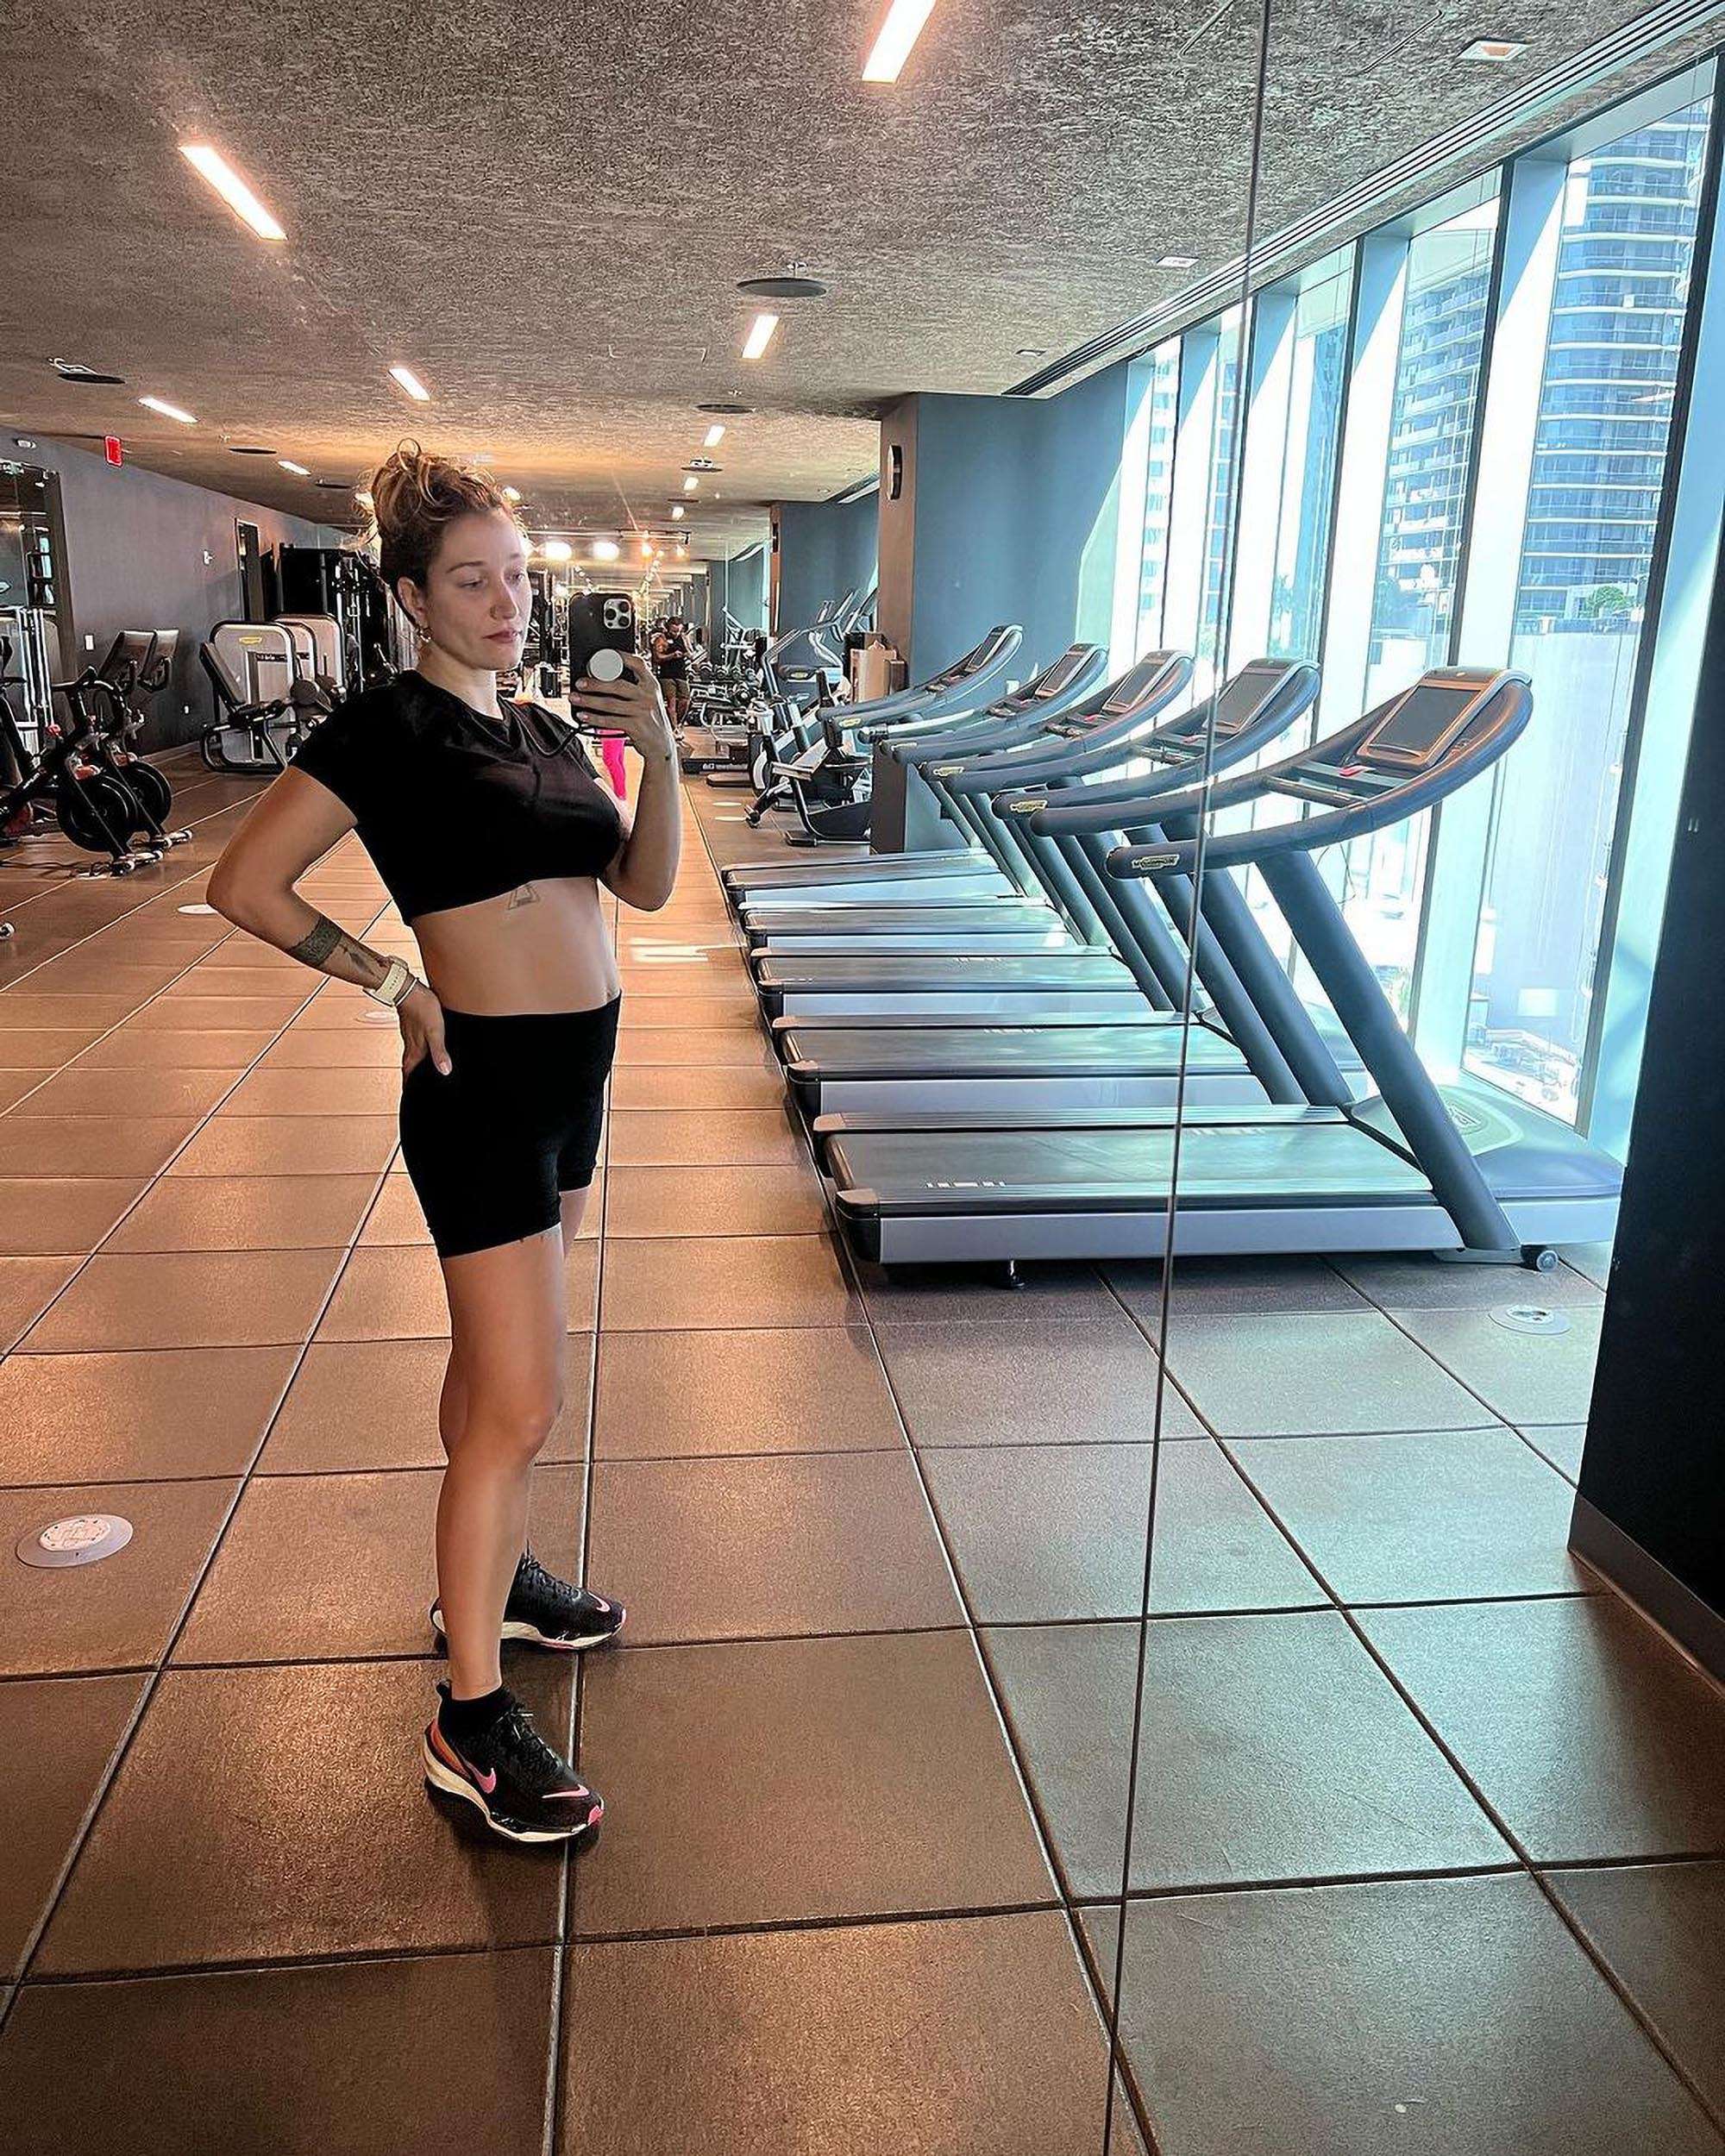 Read more about the article Pregnant Influencer Thrills Fans By Showing Her Workout Routine